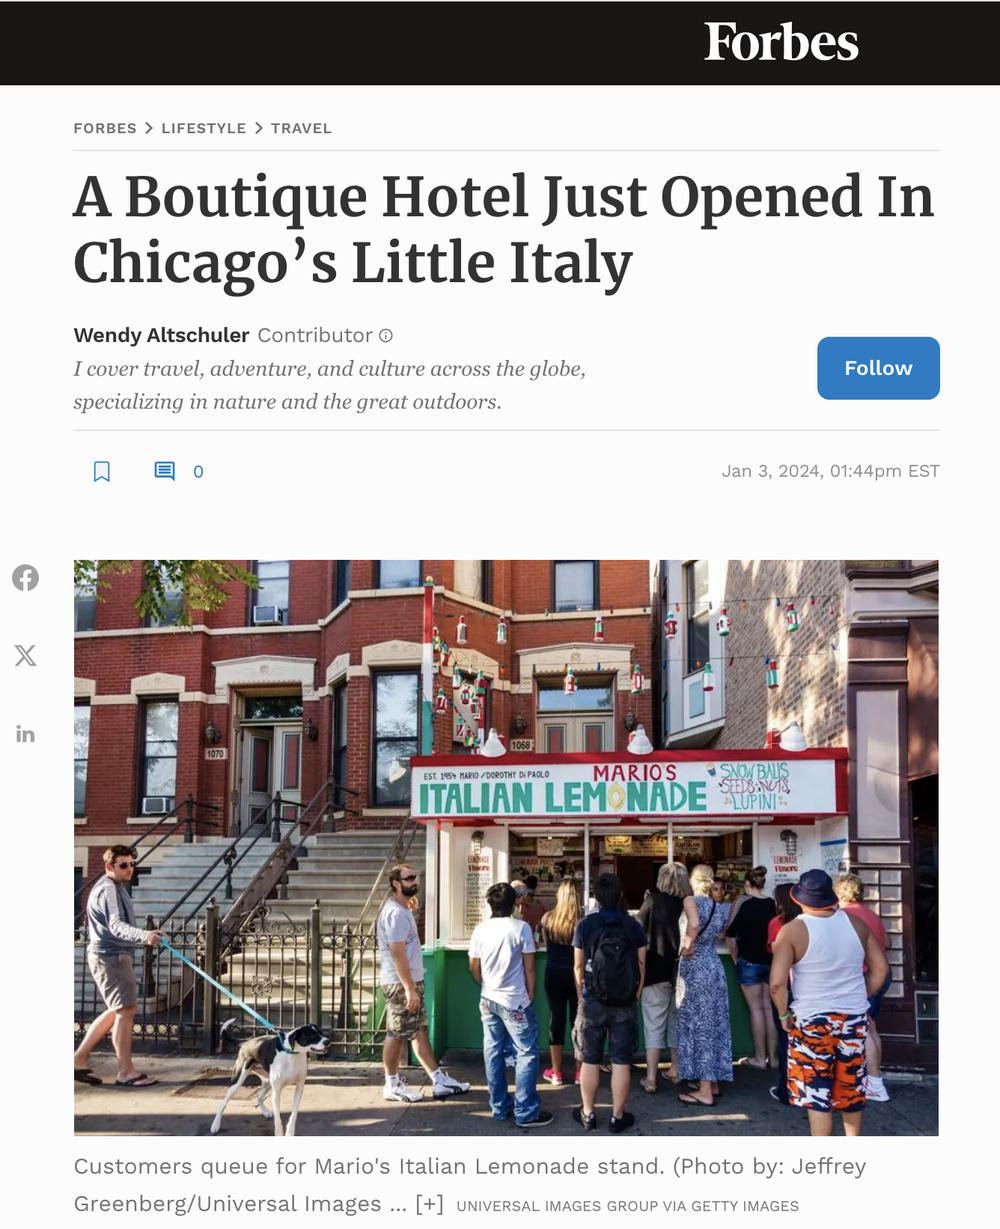 A Boutique Hotel Just Opened In Chicago’s Little Italy